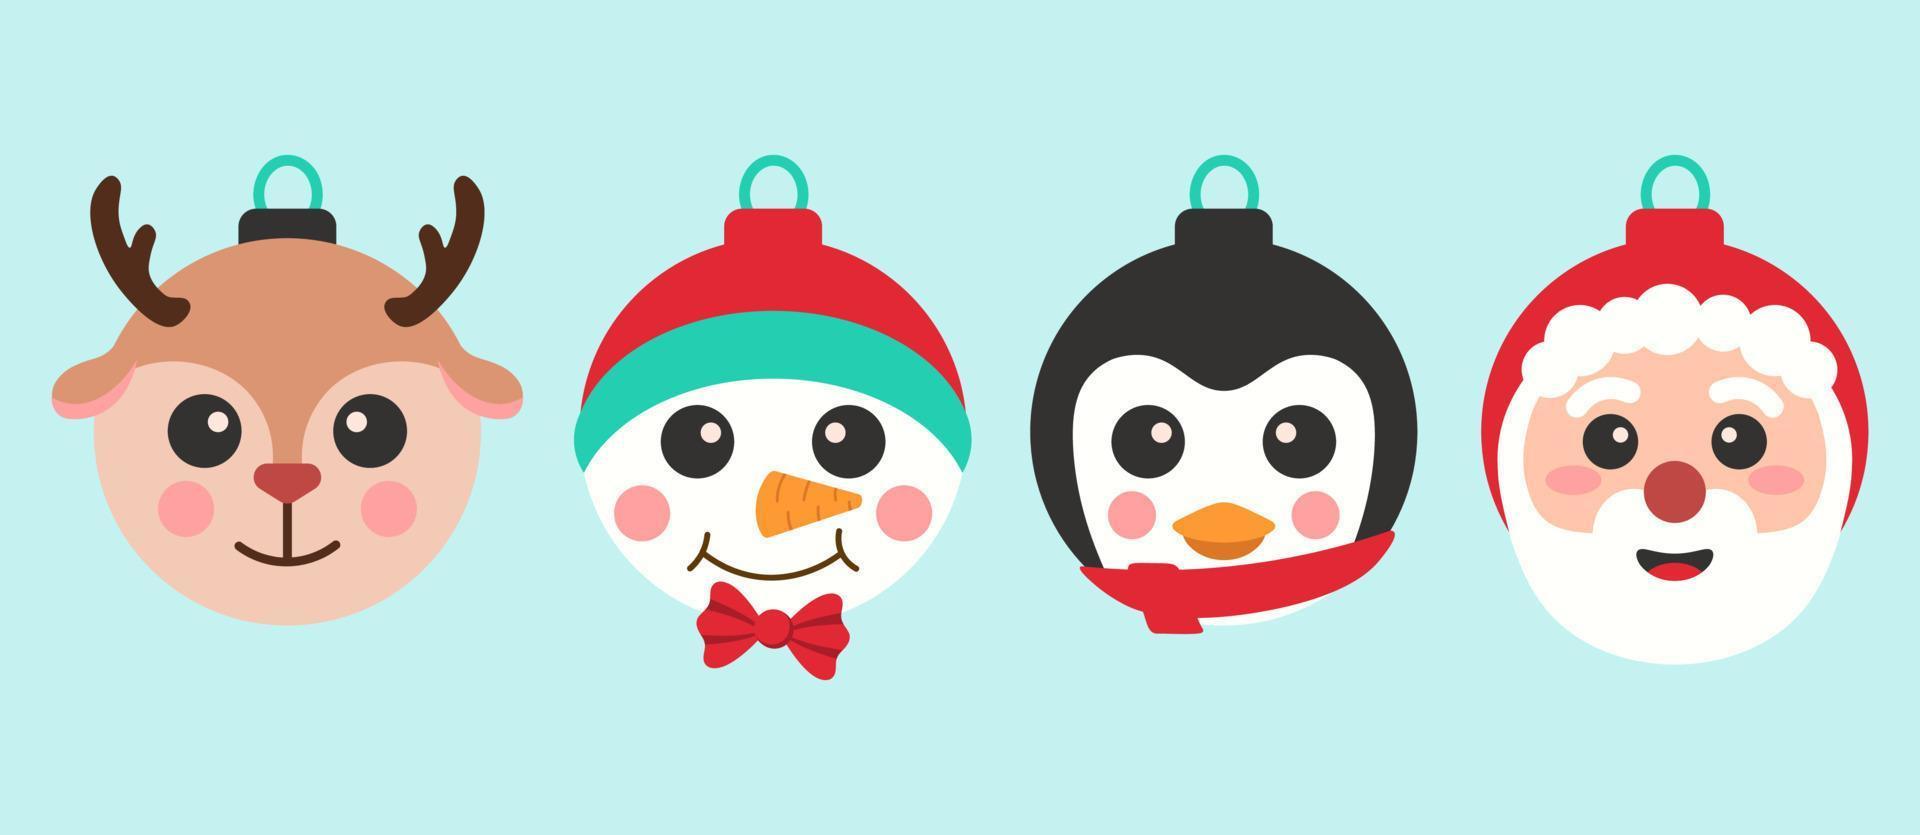 Set Of Colorful Christmas Balls With Fun Faces Vector Illustration In Flat Style